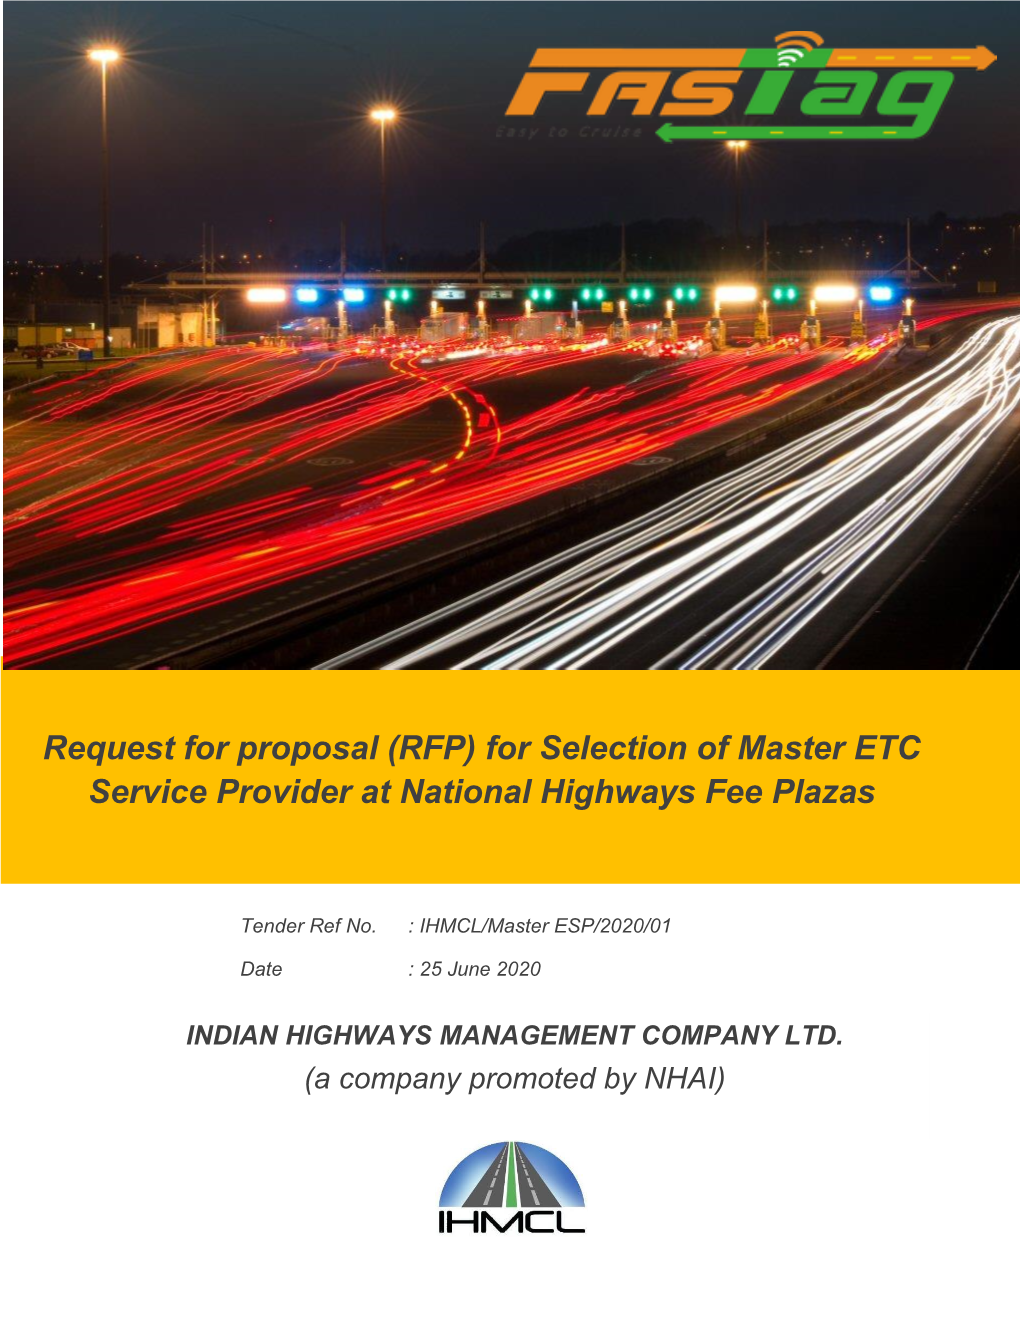 (RFP) for Selection of Master ETC Service Provider at National Highways Fee Plazas